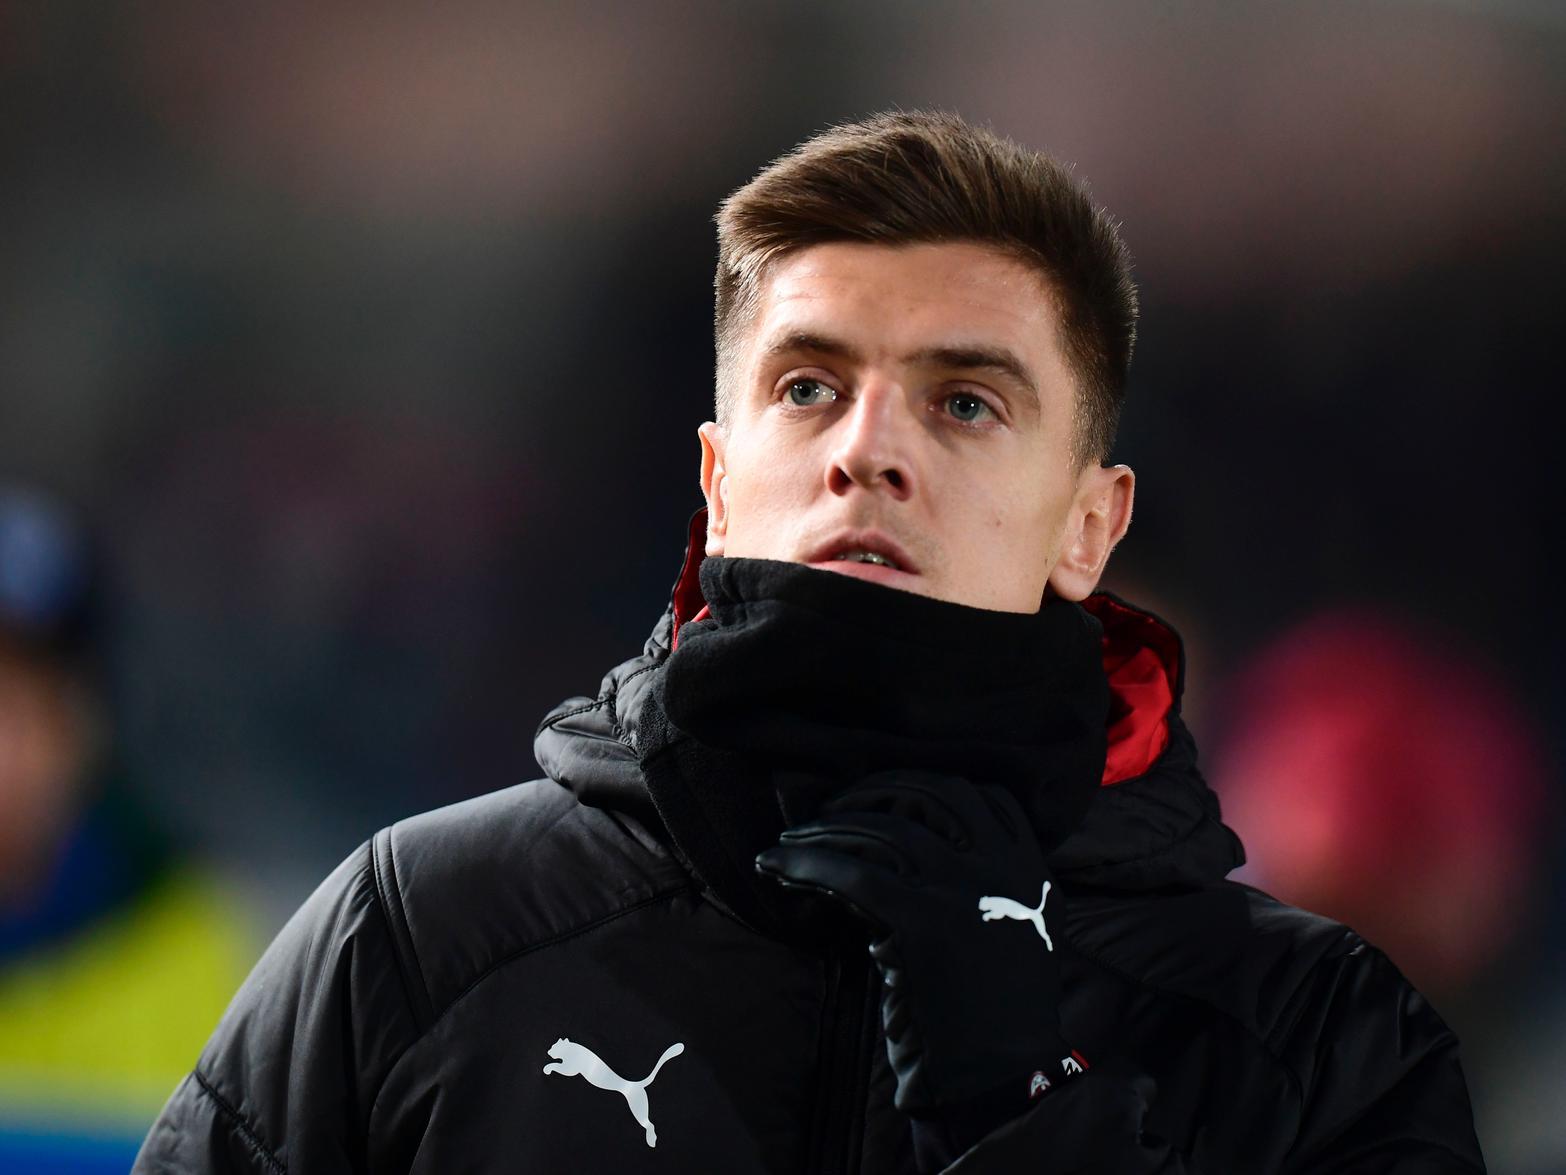 Spurs' bagged exciting wingerSteven Bergwijn today, but they're still chasing a striker to replace the injured Harry Kane. AC Milan strikerKrzysztof Piatek and Chelsea's Olivier Giroud are on Jose Mourinho's radar.